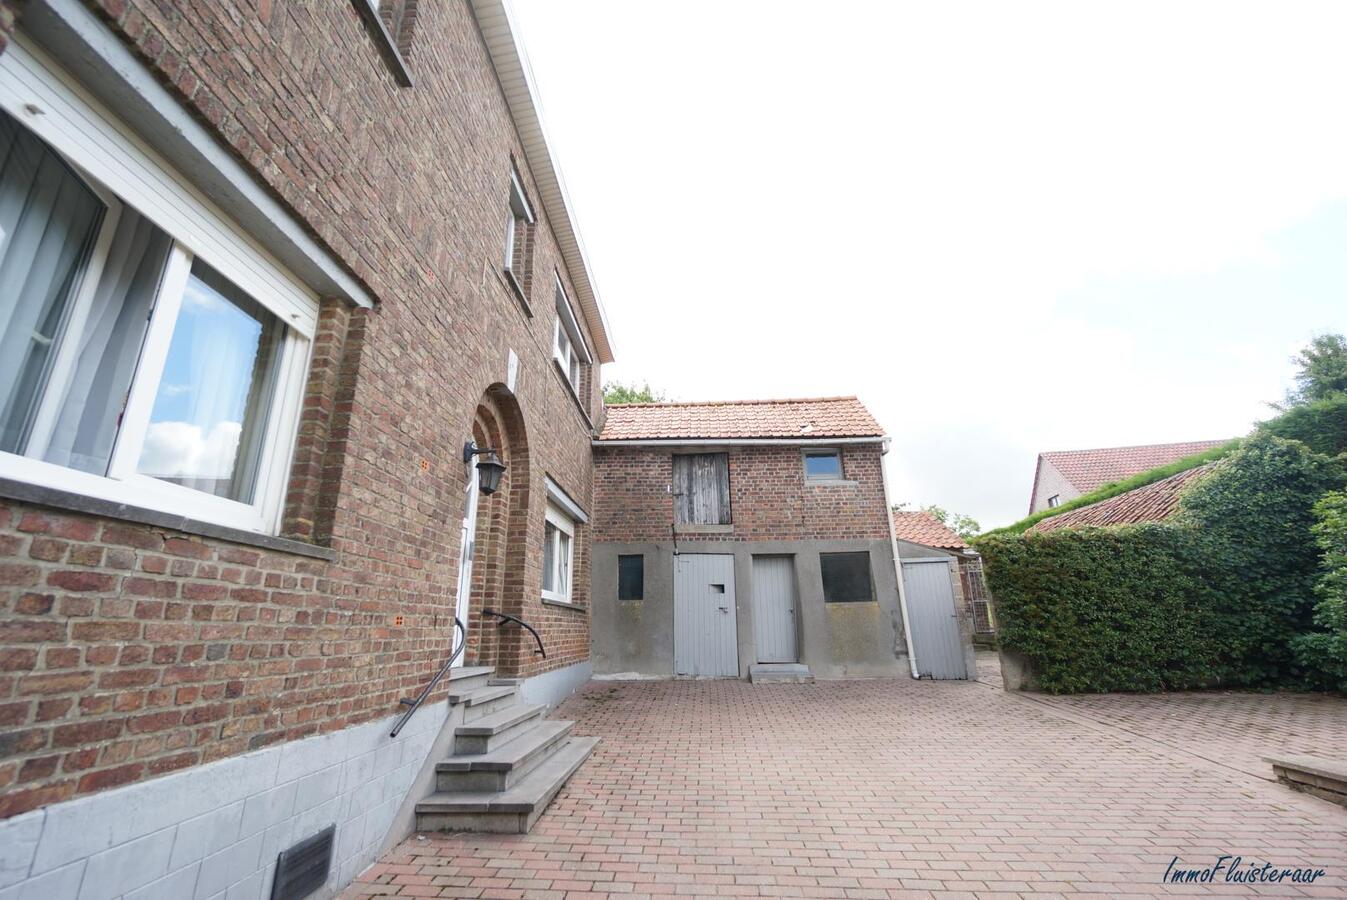 Property sold in Horpmaal